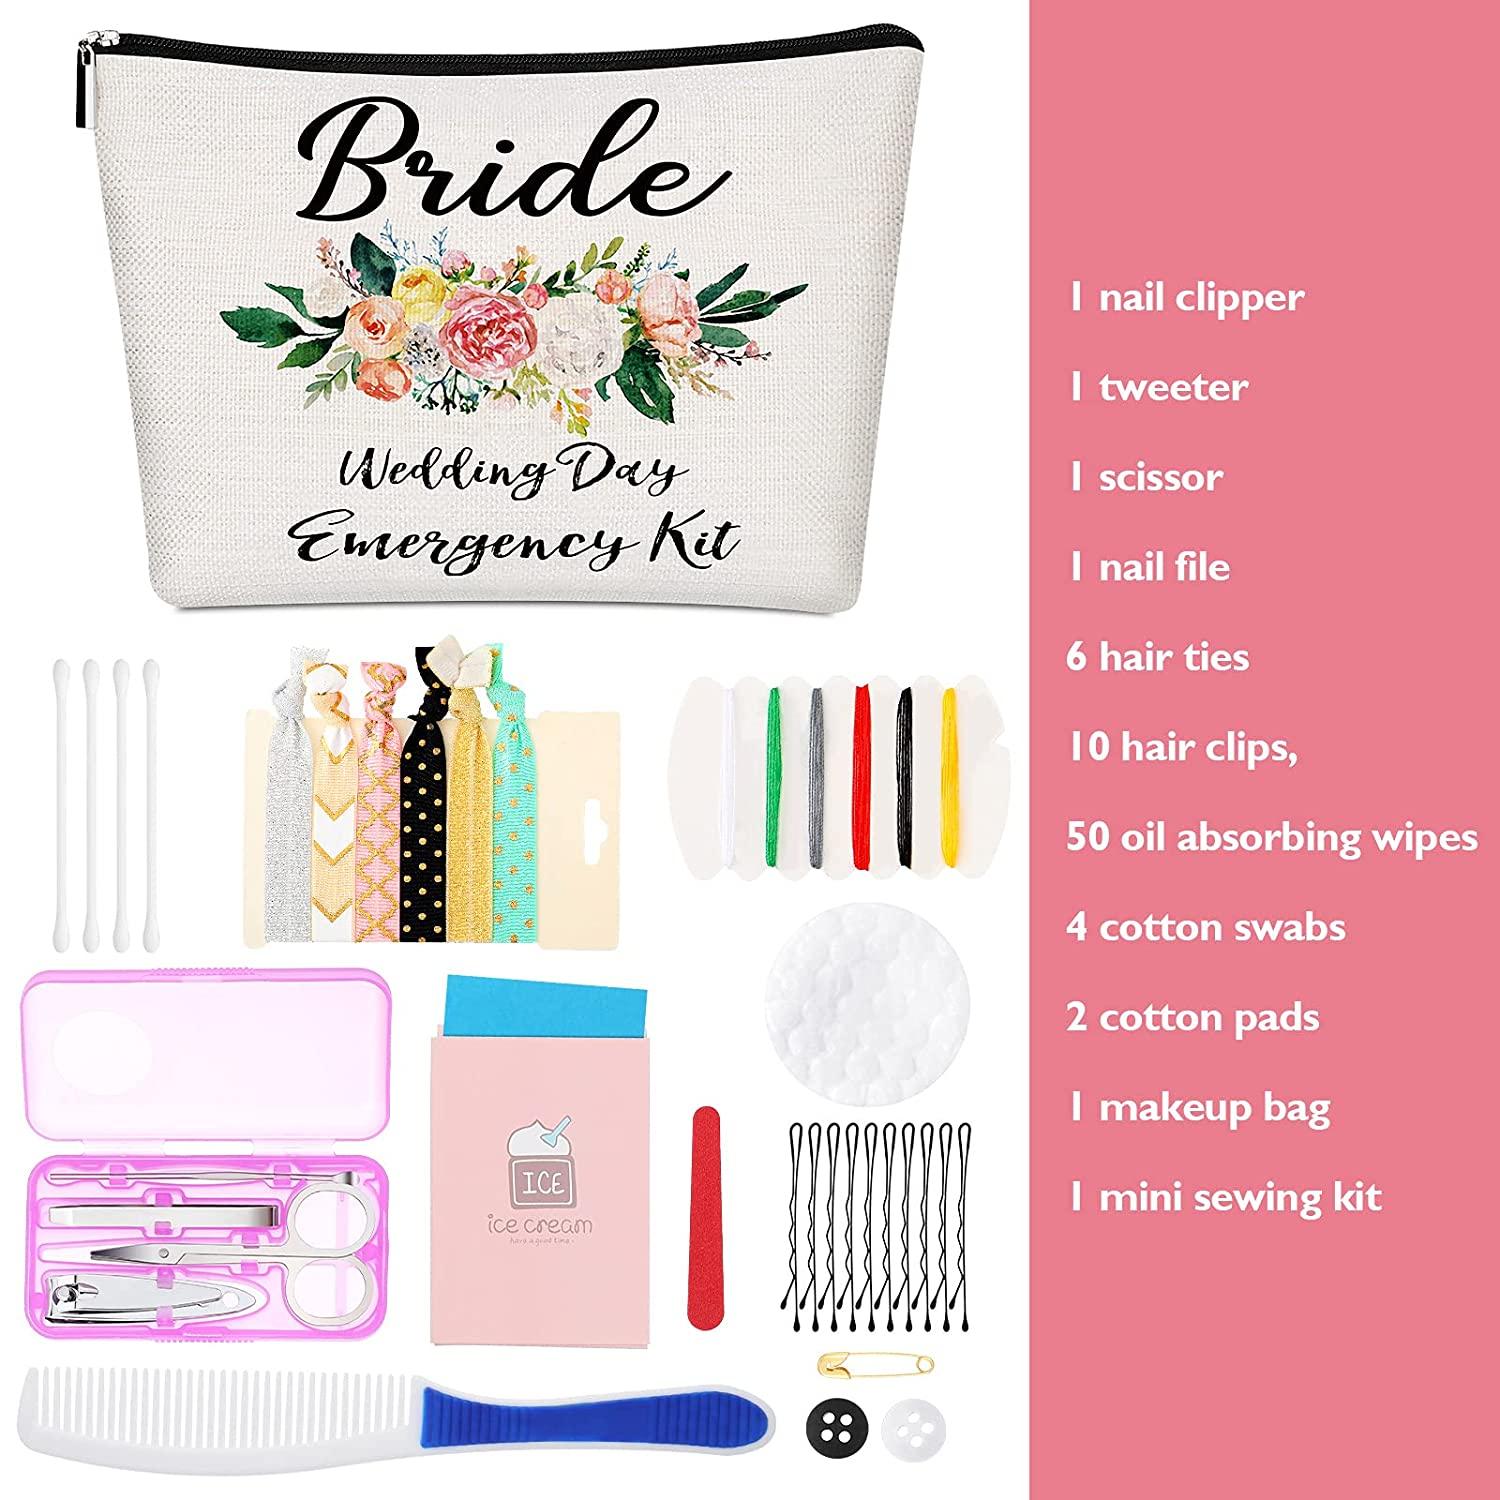 Wedding Day Emergency Kit Must Haves Connor & Co.